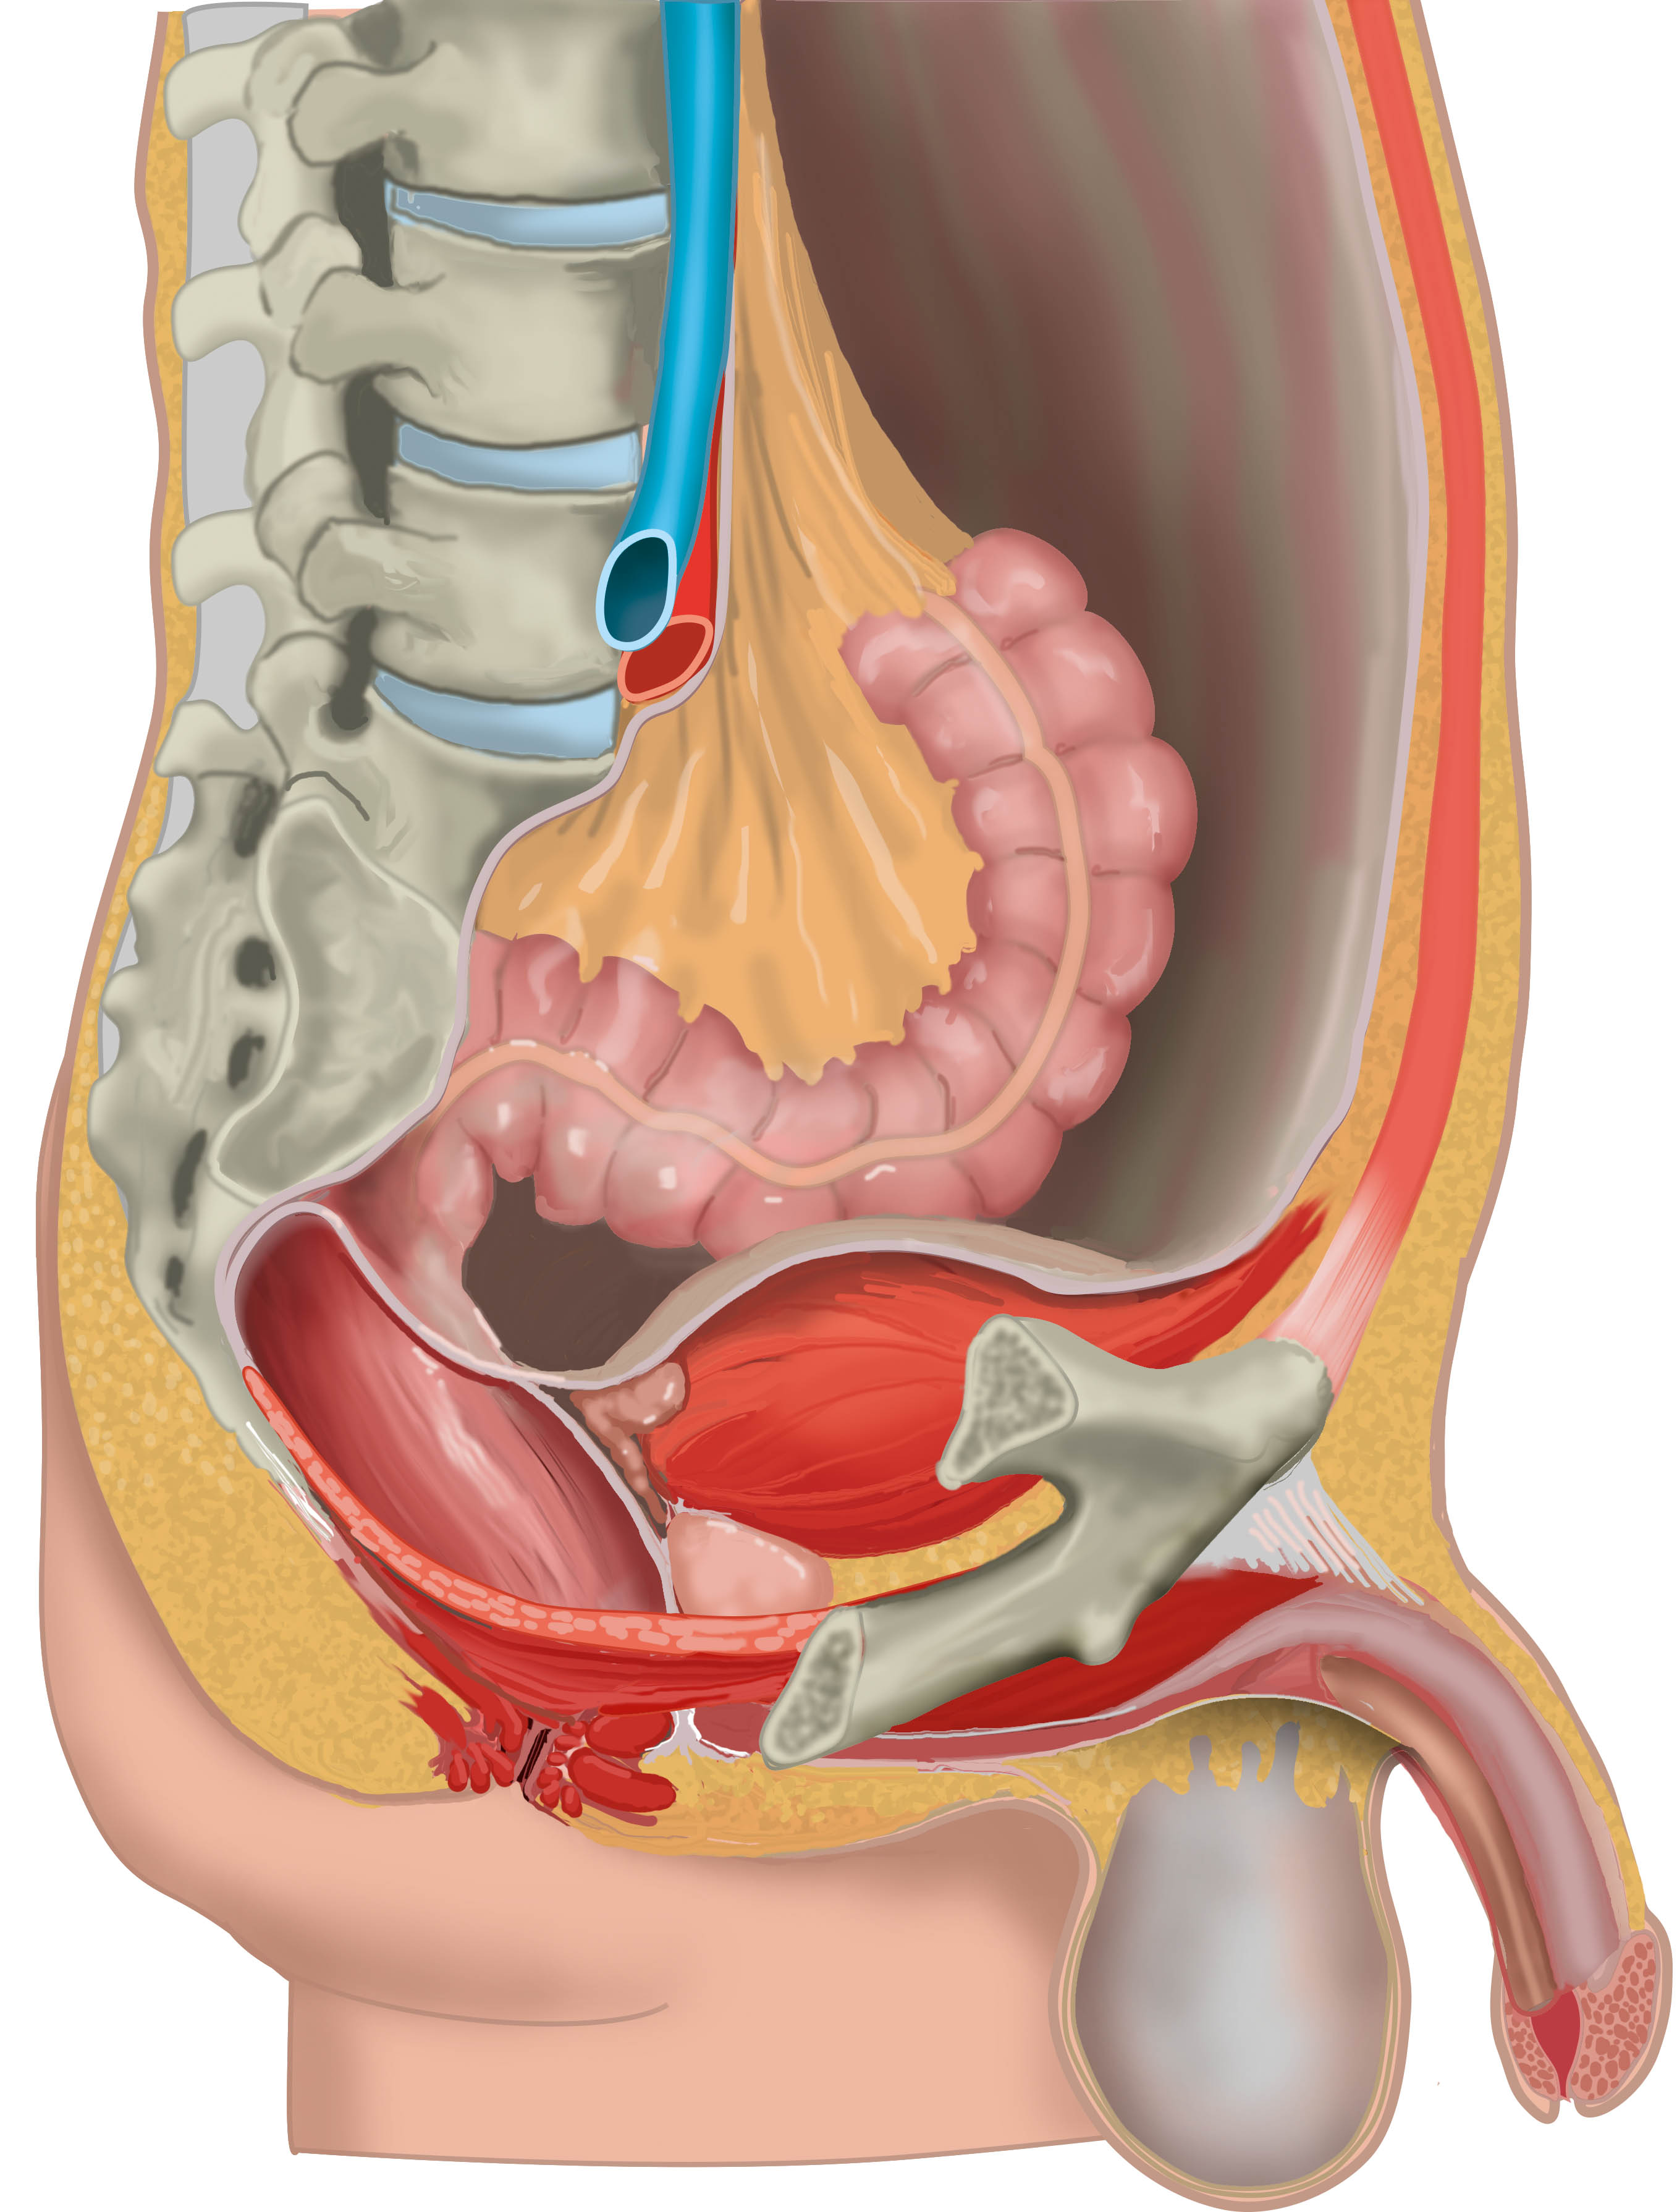 Anatomy of the male pelvic cavity in humans, sagittal view